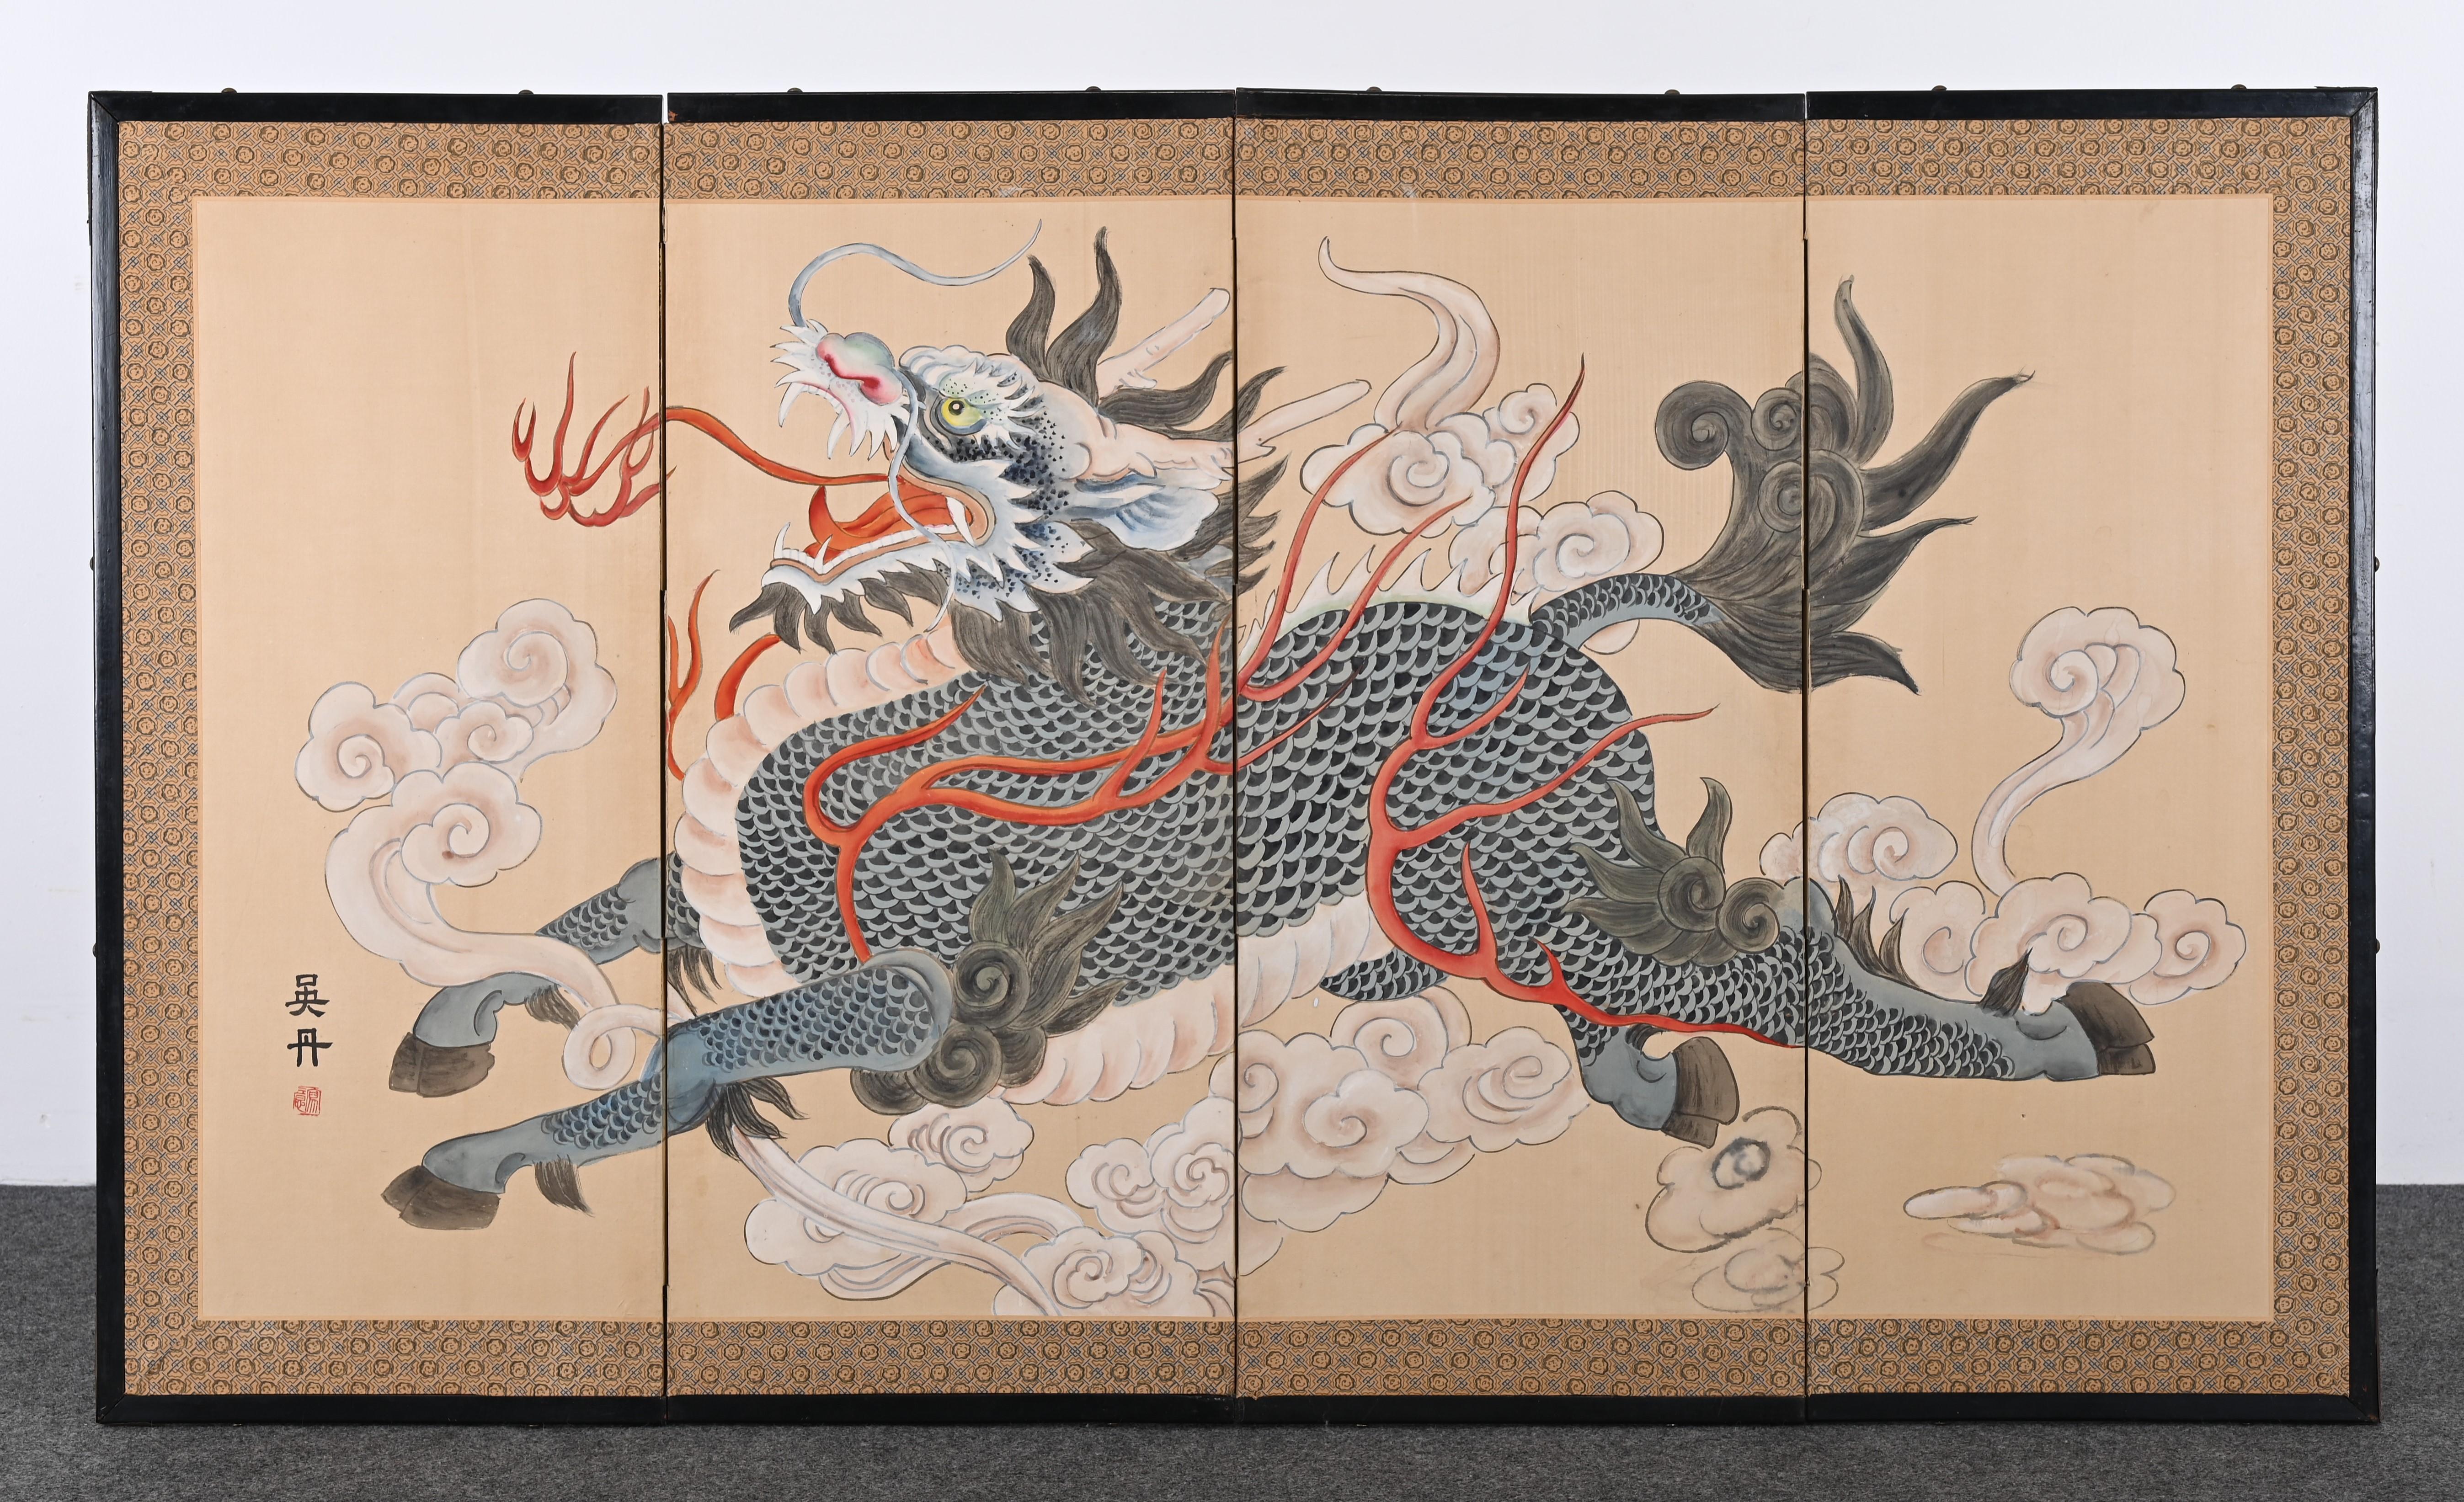 A wonderful painted dragon or foo dog on silk panels. This screen was made in the 20th Century. The dragon painting has beautiful contrasting colors with Chinese red and muted blues and greys with white accents. This screen would work in any